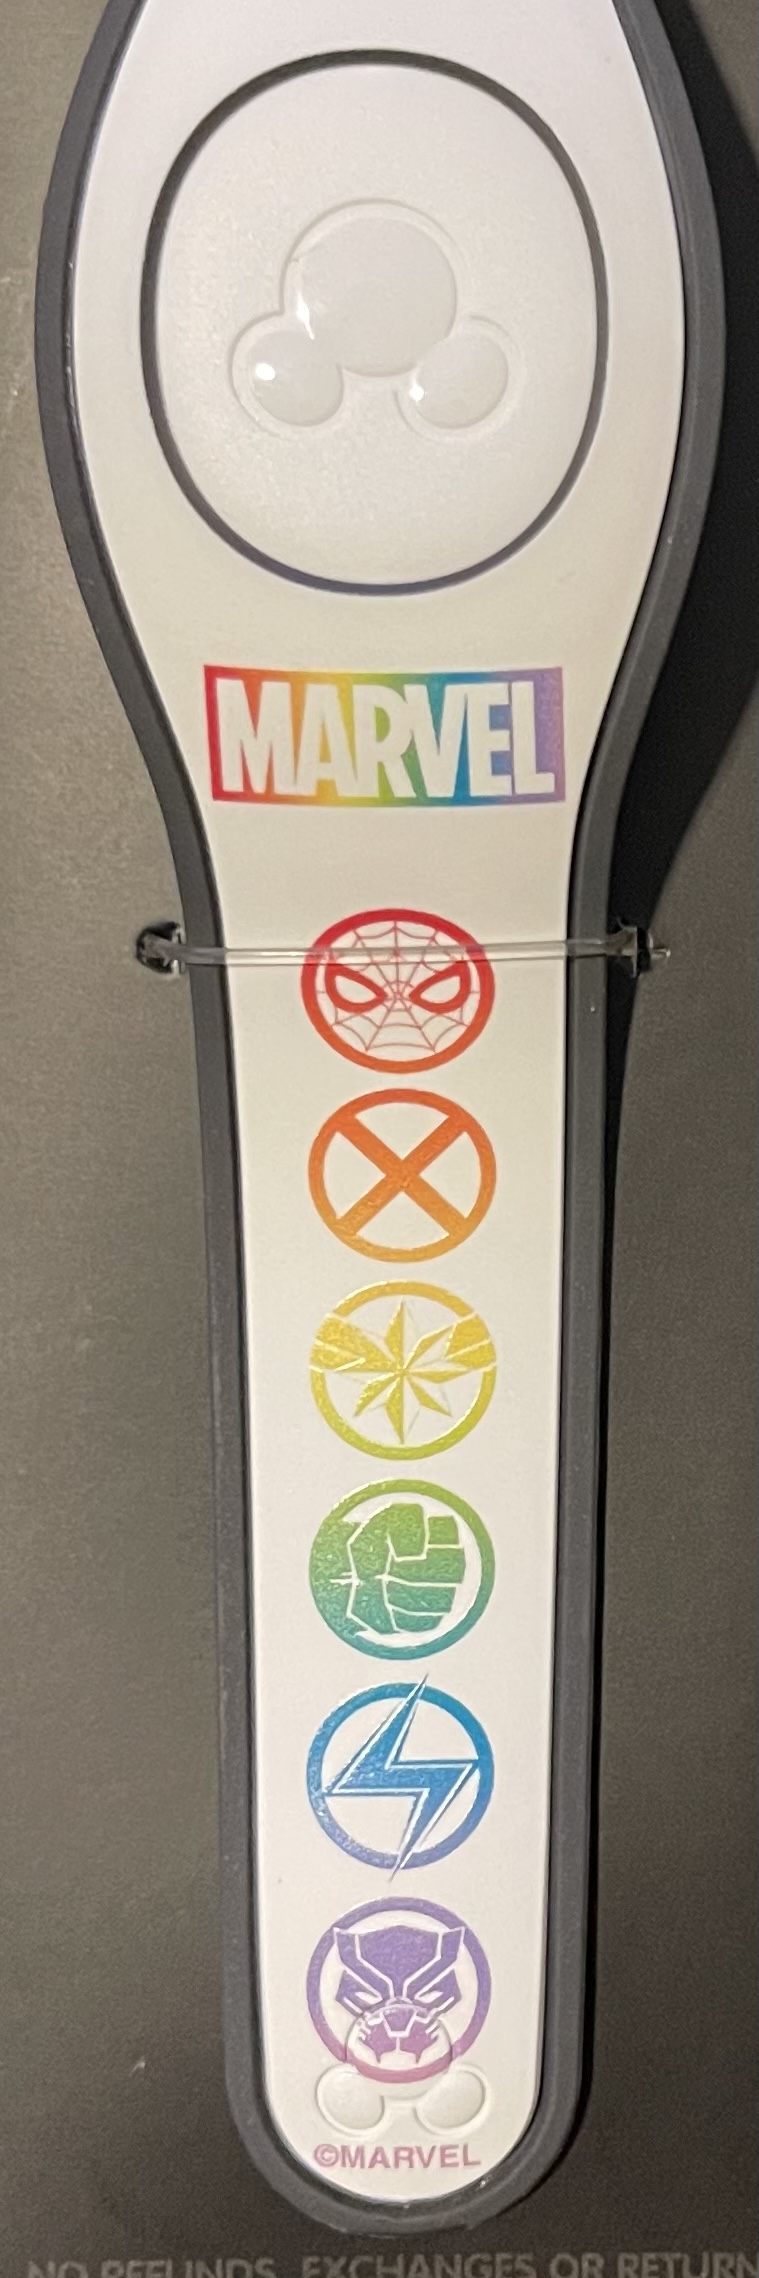 Marvel Pride Open Edition MagicBand is now out for purchase